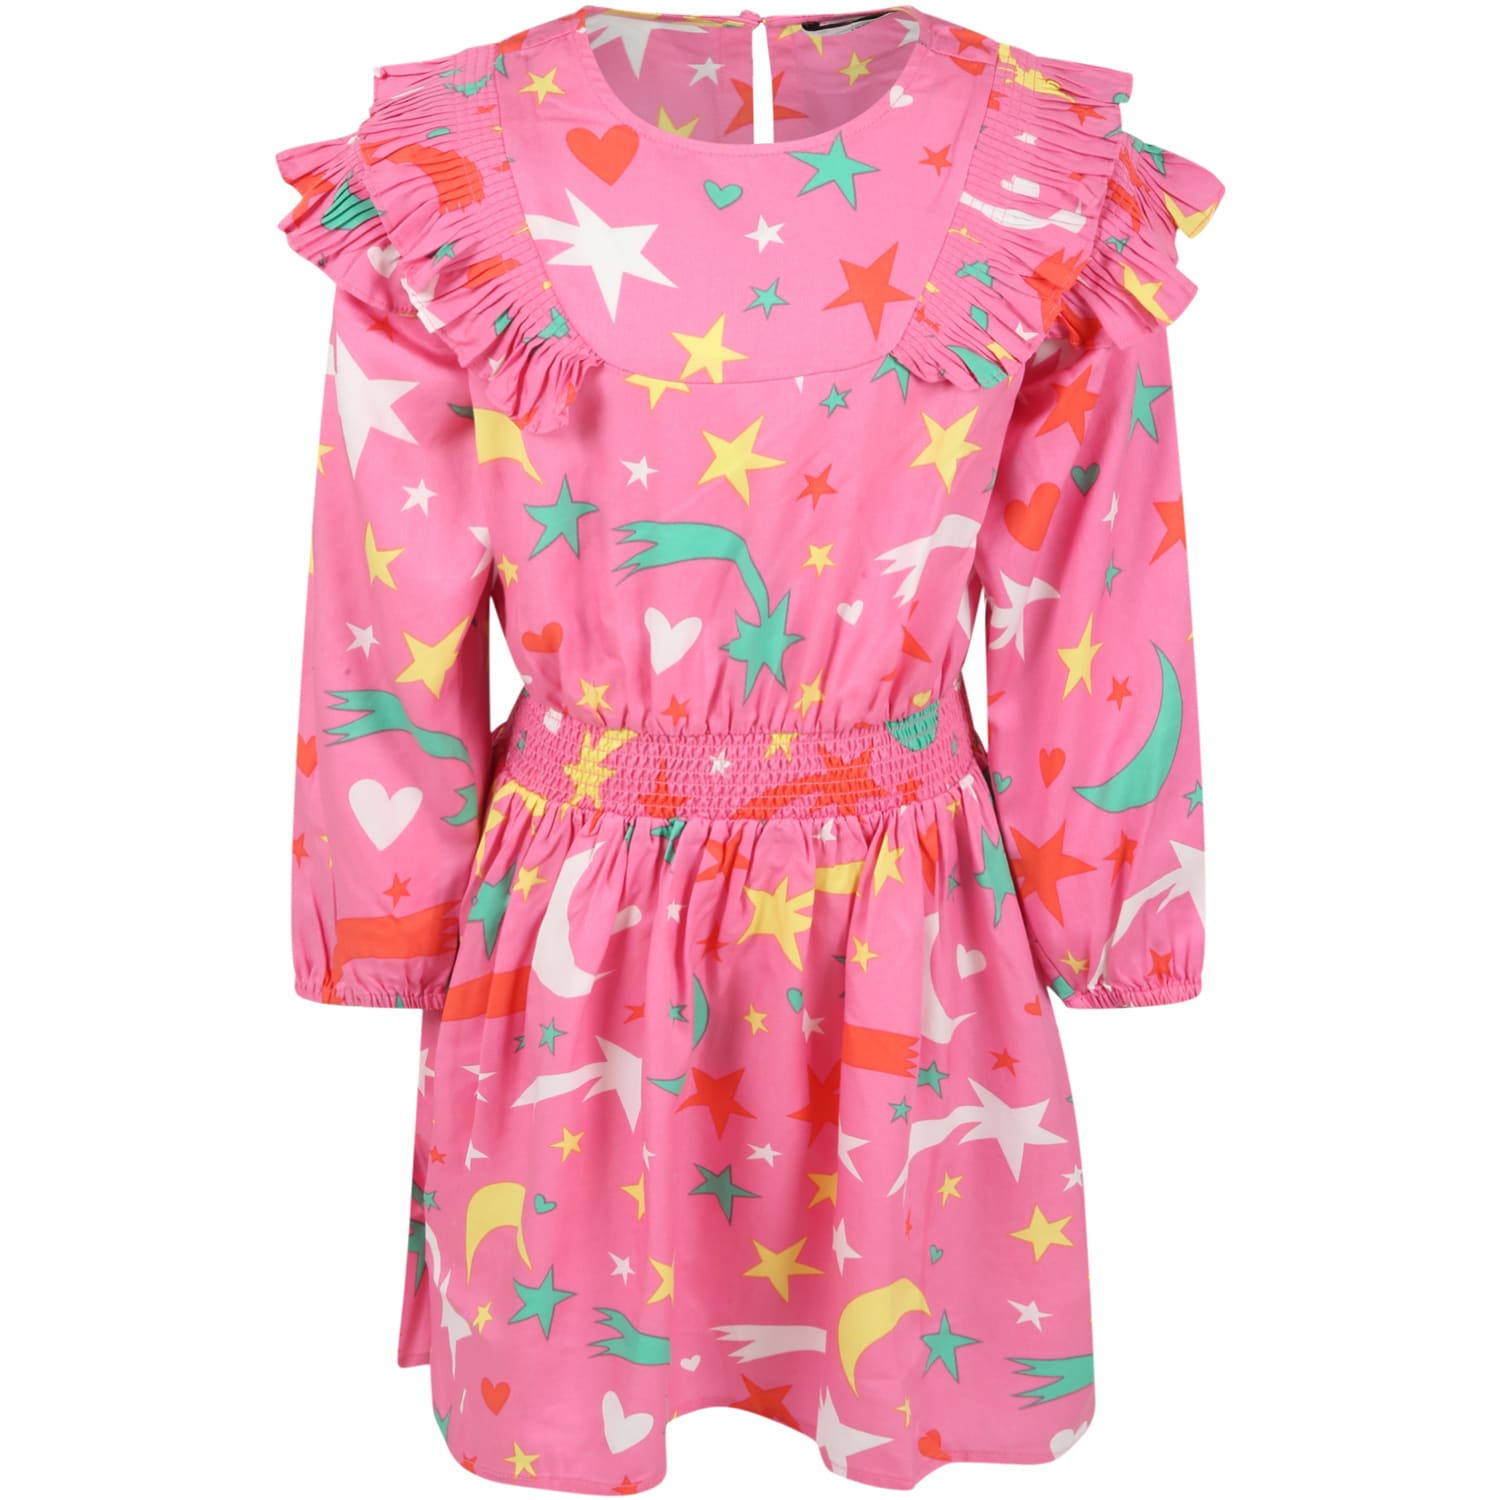 STELLA MCCARTNEY FUCHSIA DRESS FOR GIRL WITH STARS, HEARTS AND MOONS